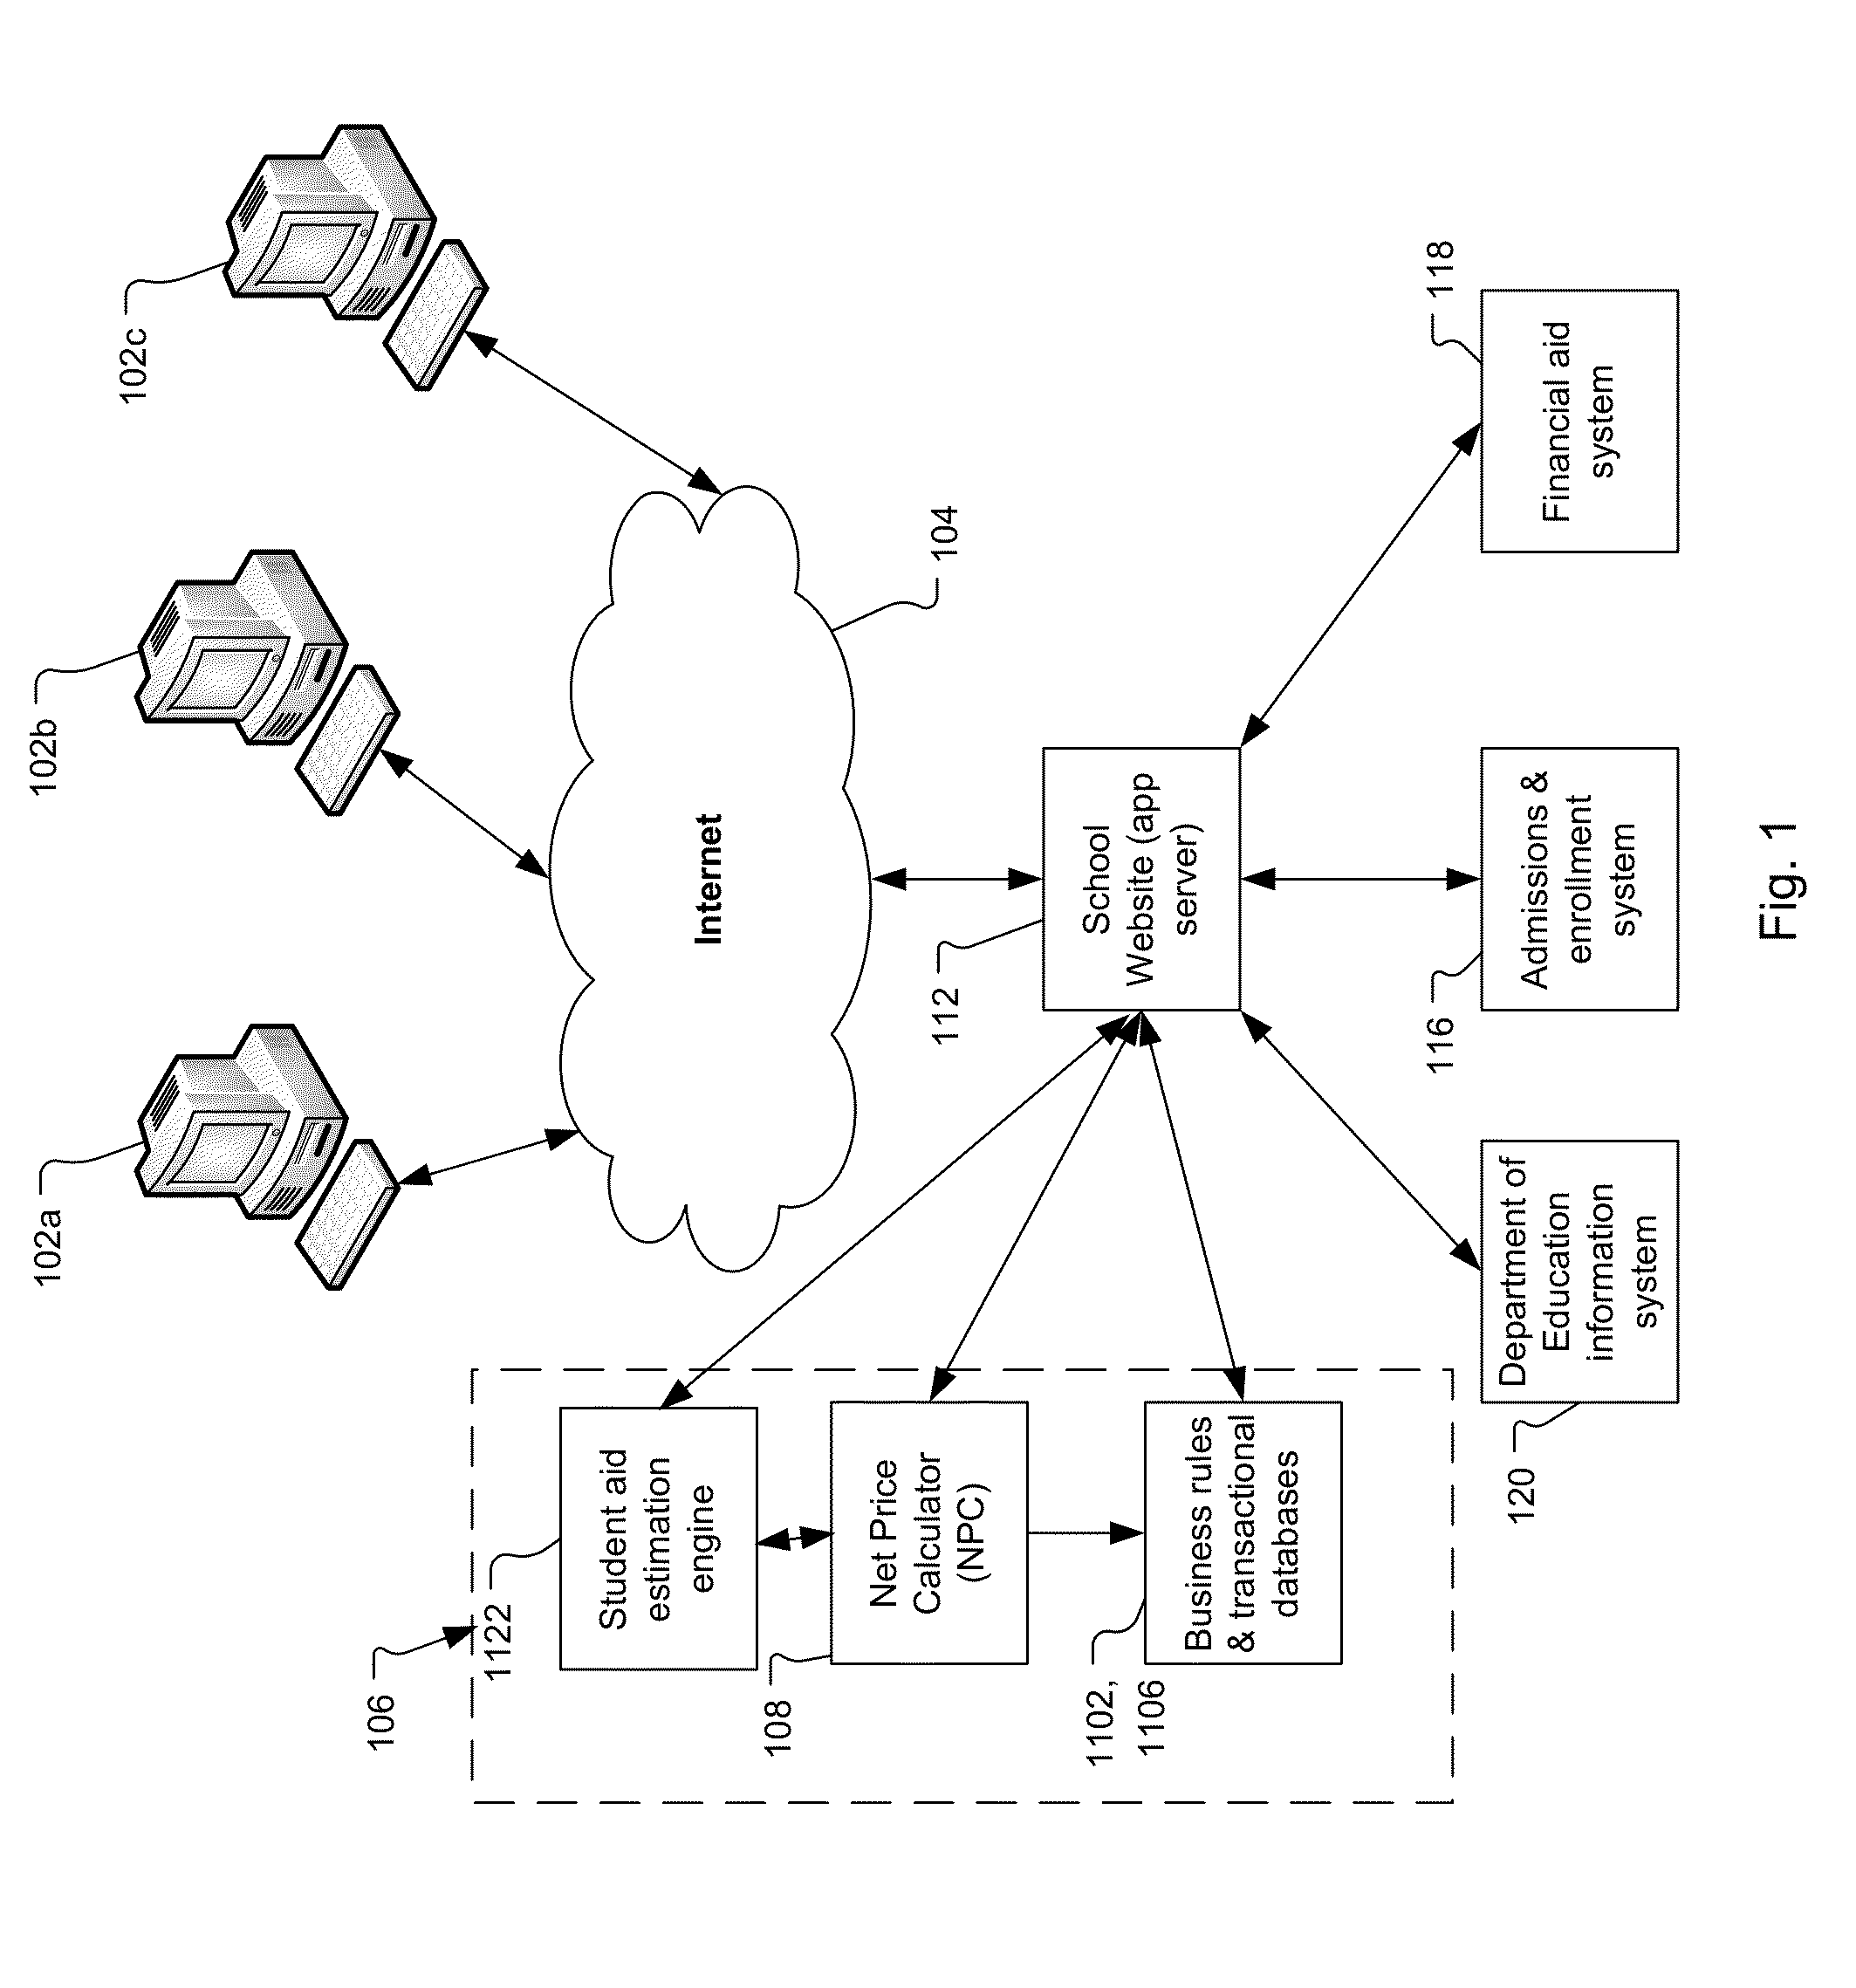 Method and System for Document Generation from Projected Financial Aid Award